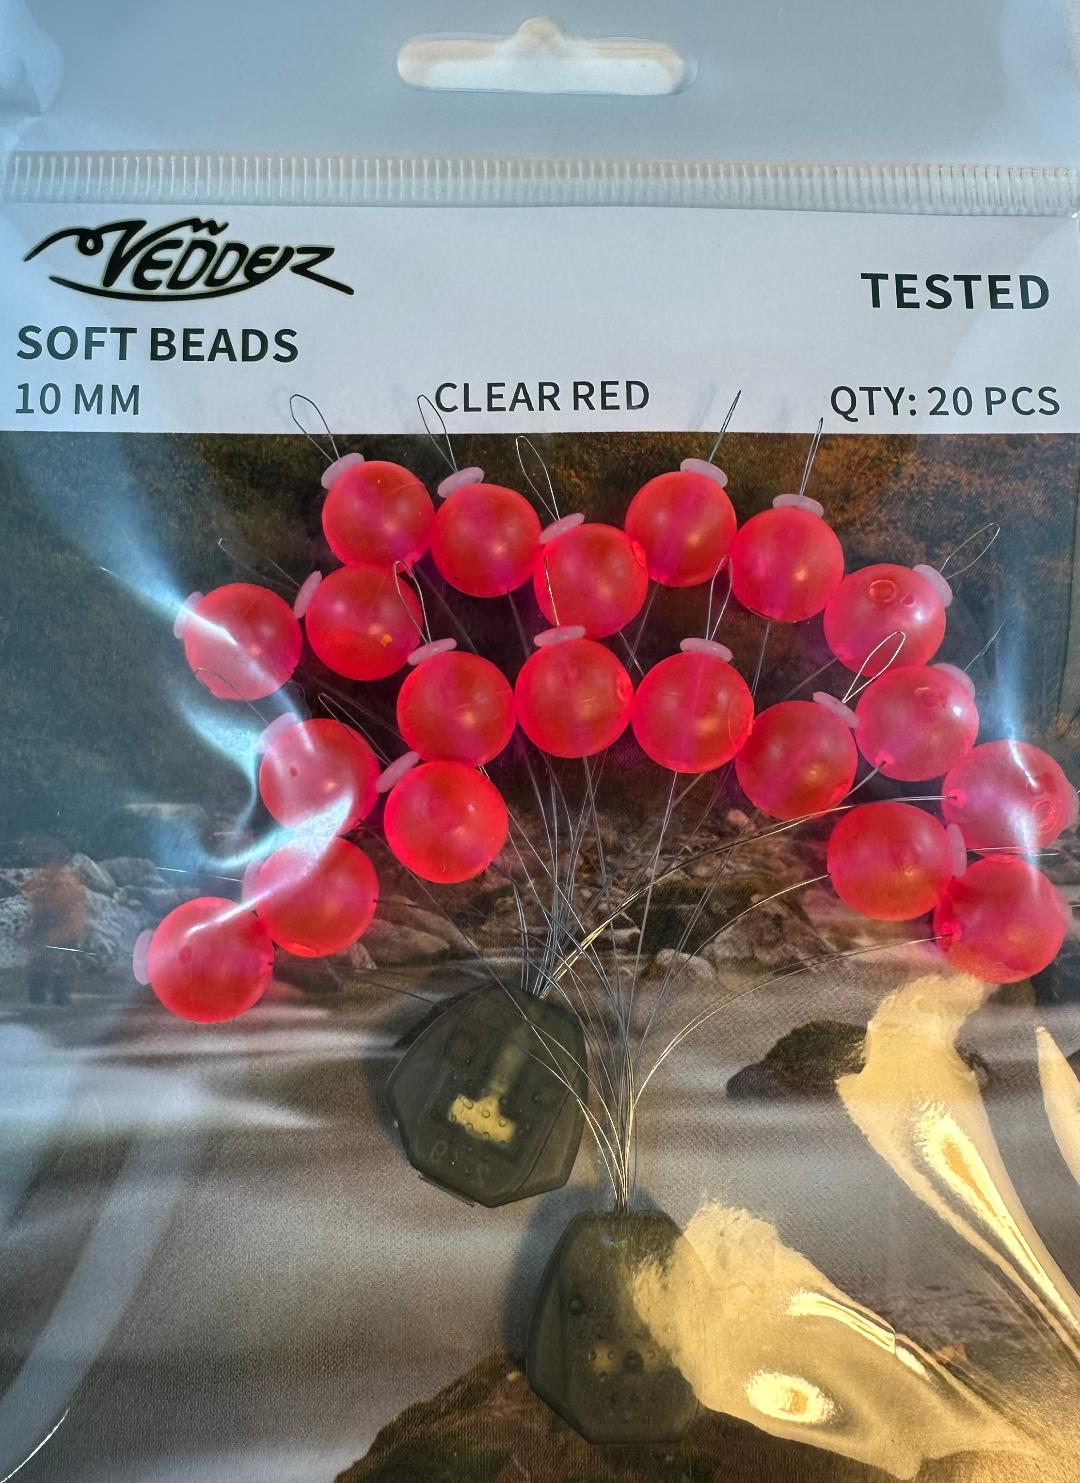 VSB-CR 10 Vedder10 mm Clear Red Soft Beads x20 with Stoppers x20